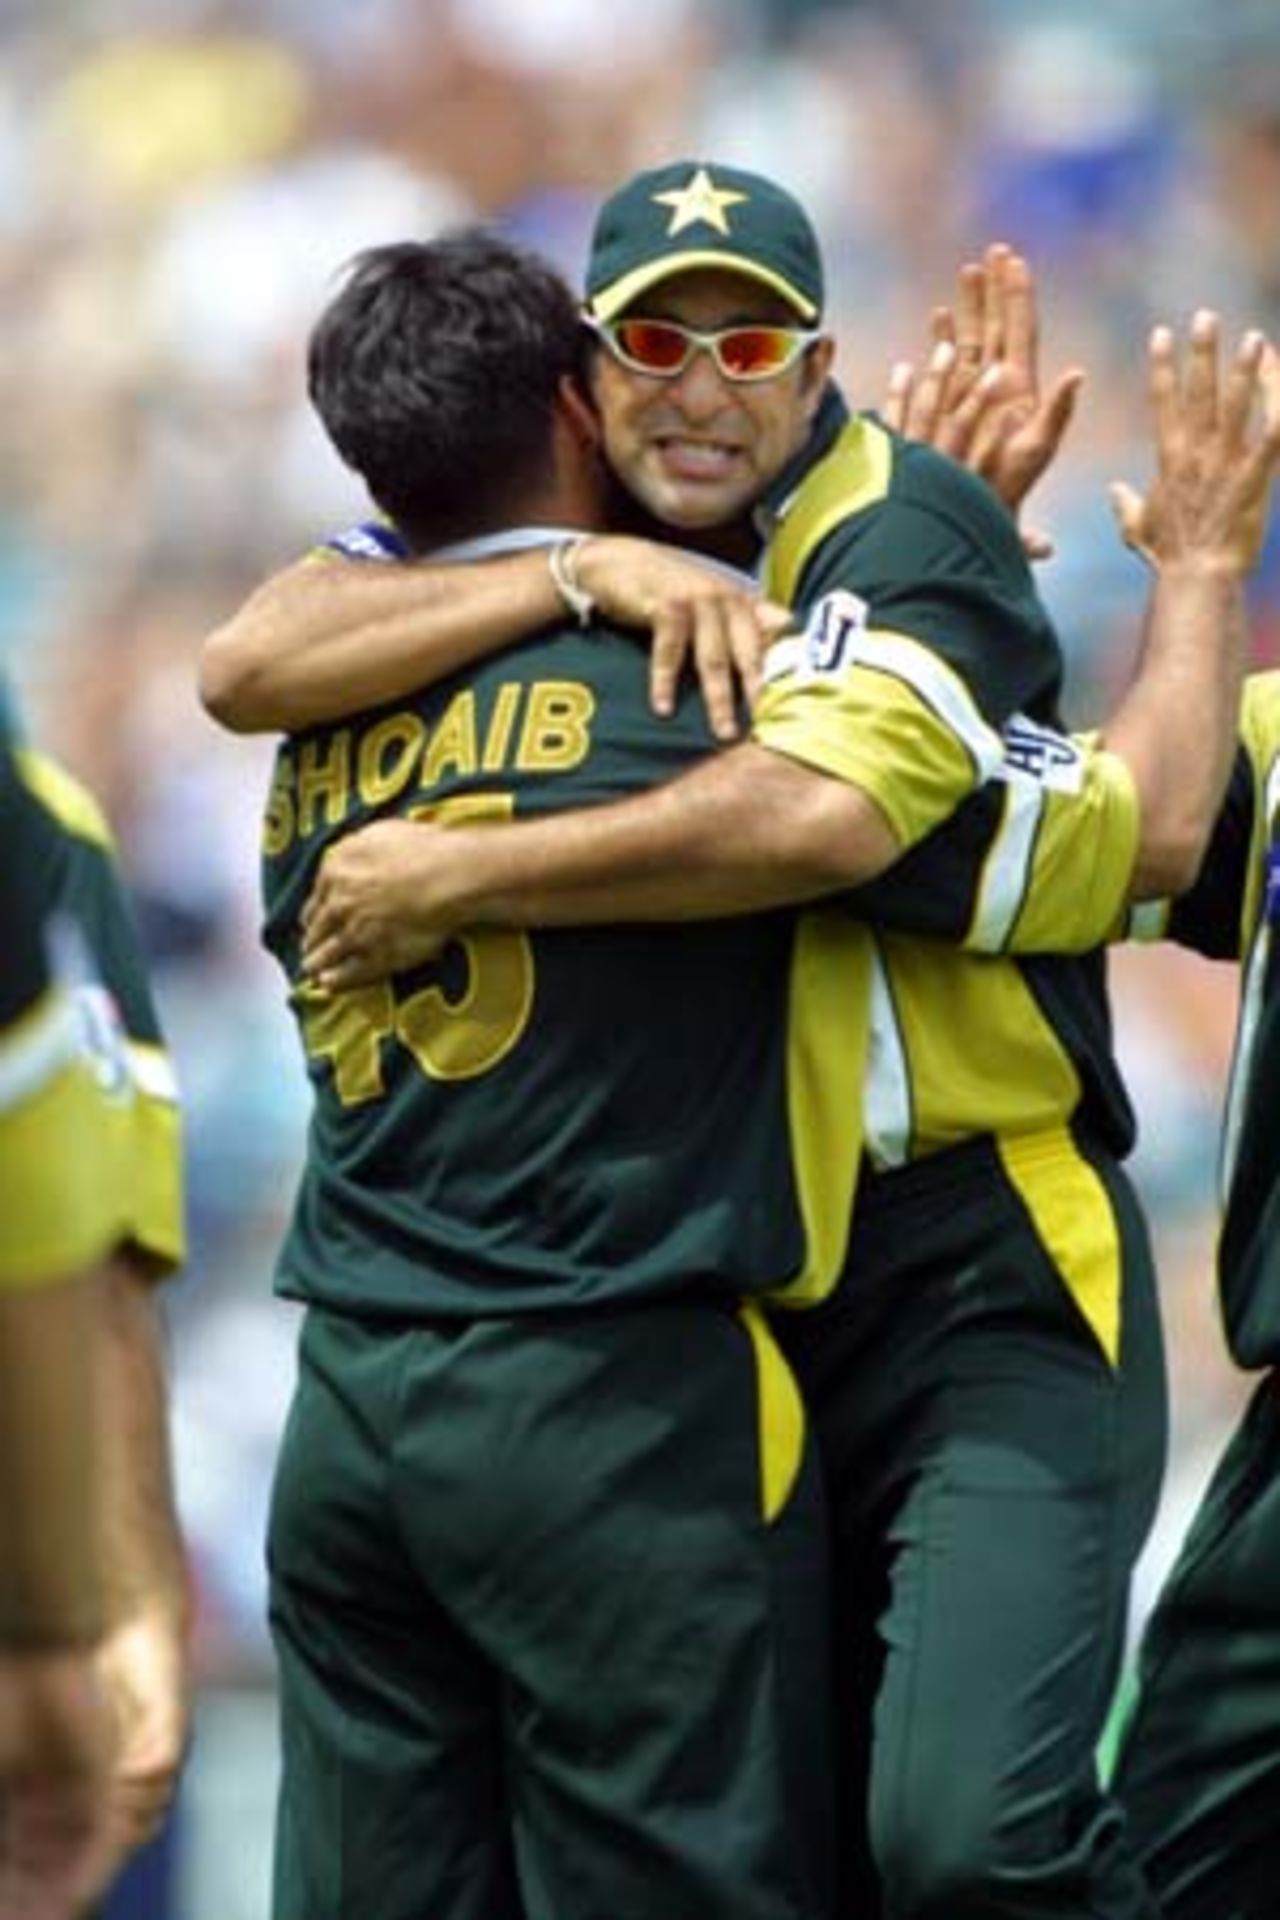 Pakistan fast bowler Shoaib Akhtar is hugged by fielder Wasim Akram upon dismissing New Zealand tail-end batsman Daryl Tuffey lbw for a golden duck to end the innings. Tuffey was Shoaib's fifth victim in a burst of five wickets for two runs in the space of 11 balls. Shoaib finished with figures of 5-19 from 6.3 overs, his first five-wicket bag in One-Day Internationals. 1st One-Day International: New Zealand v Pakistan at Eden Park, Auckland, 18 February 2001.